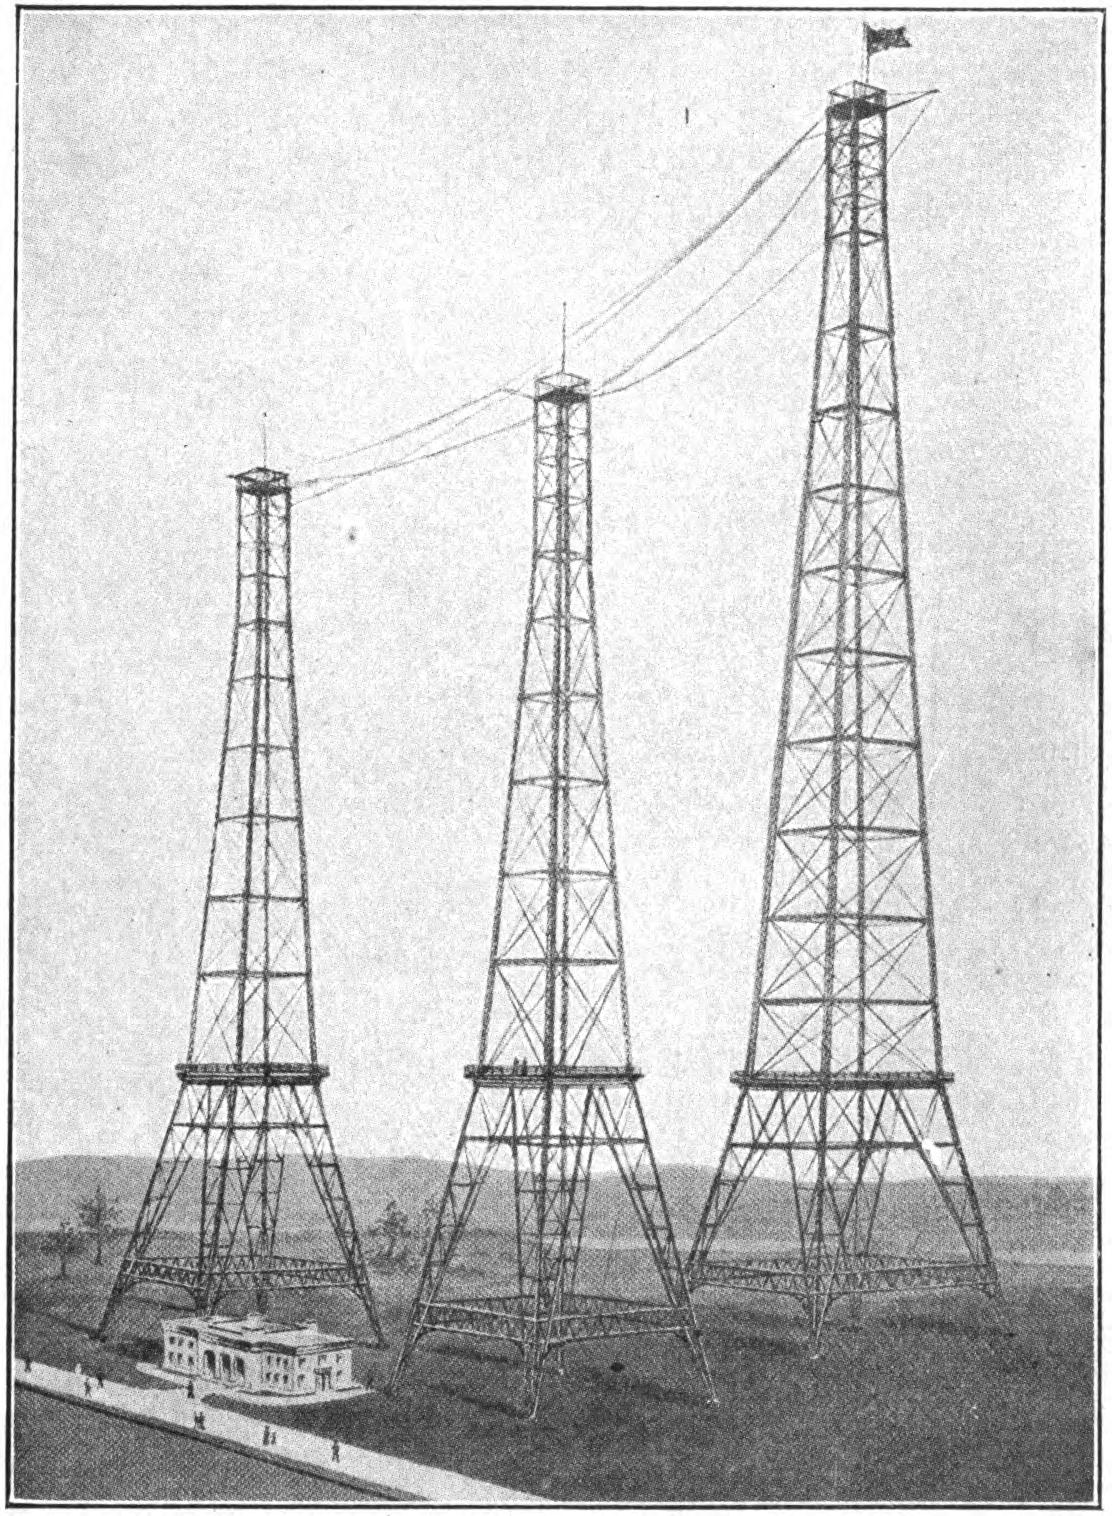 FIG. 151.—The high-power Naval wireless telegraph station under construction at Washington, D. C.